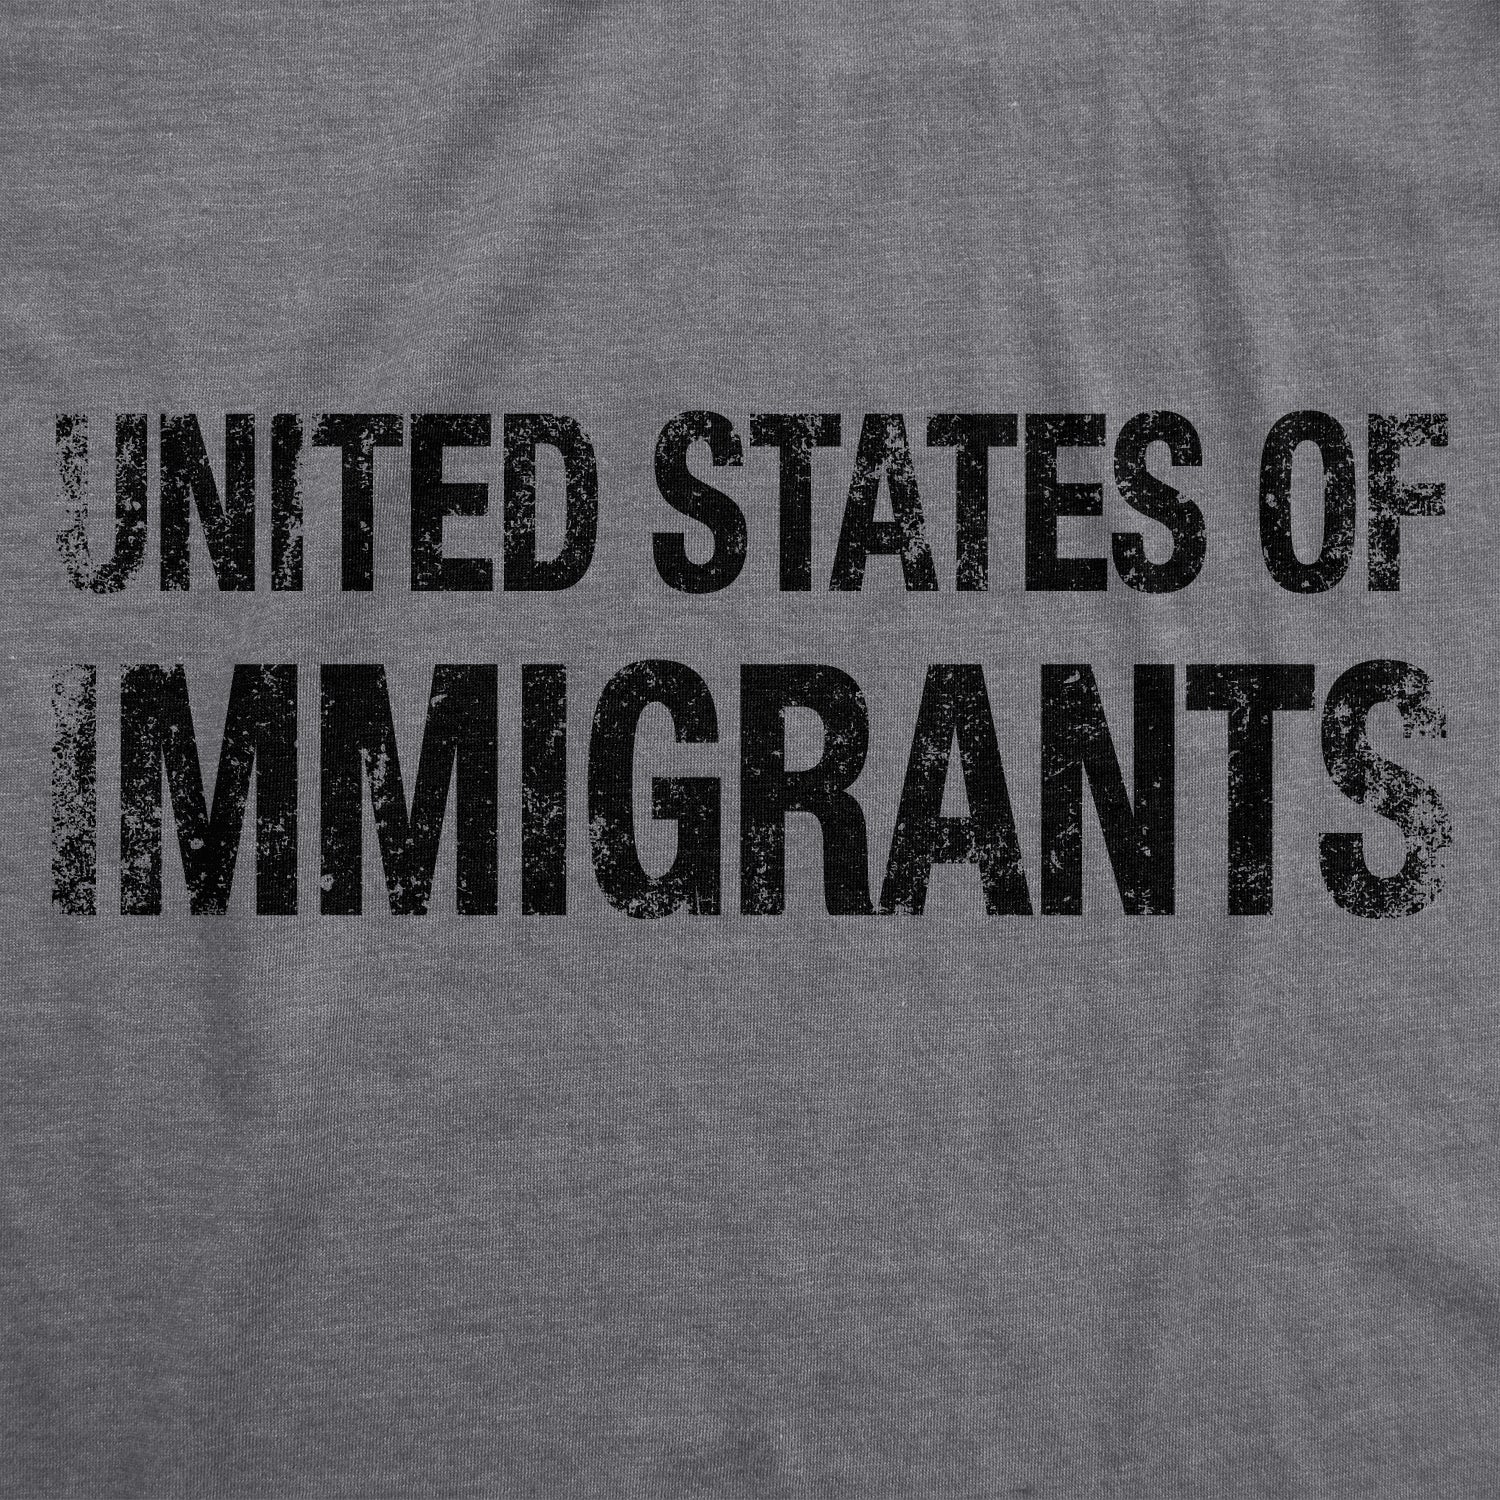 Funny Dark Heather Grey United States of Immigrants Womens T Shirt Nerdy Fourth of July Political Tee